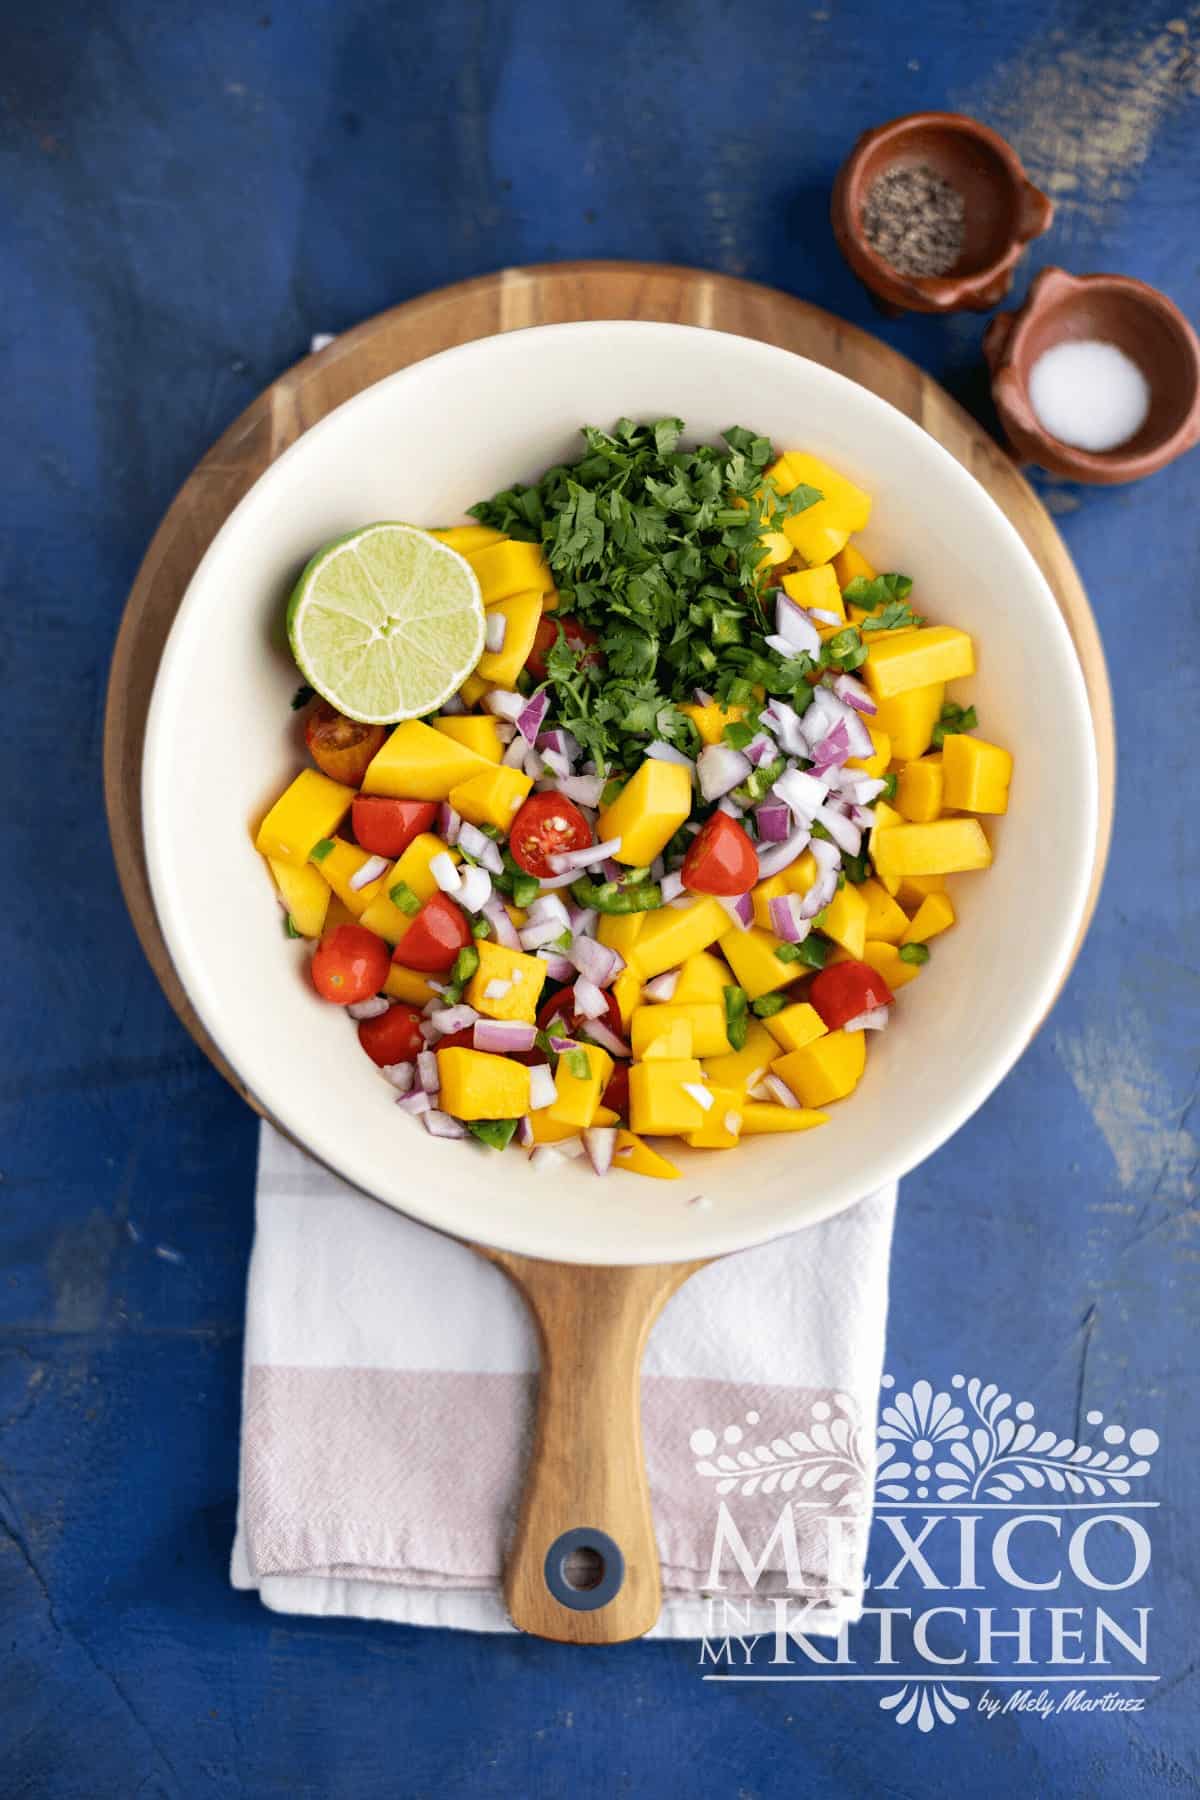 Chopped mango chunks, tomatoes, red onions, jalapeños, and cilantro served in a bowl.